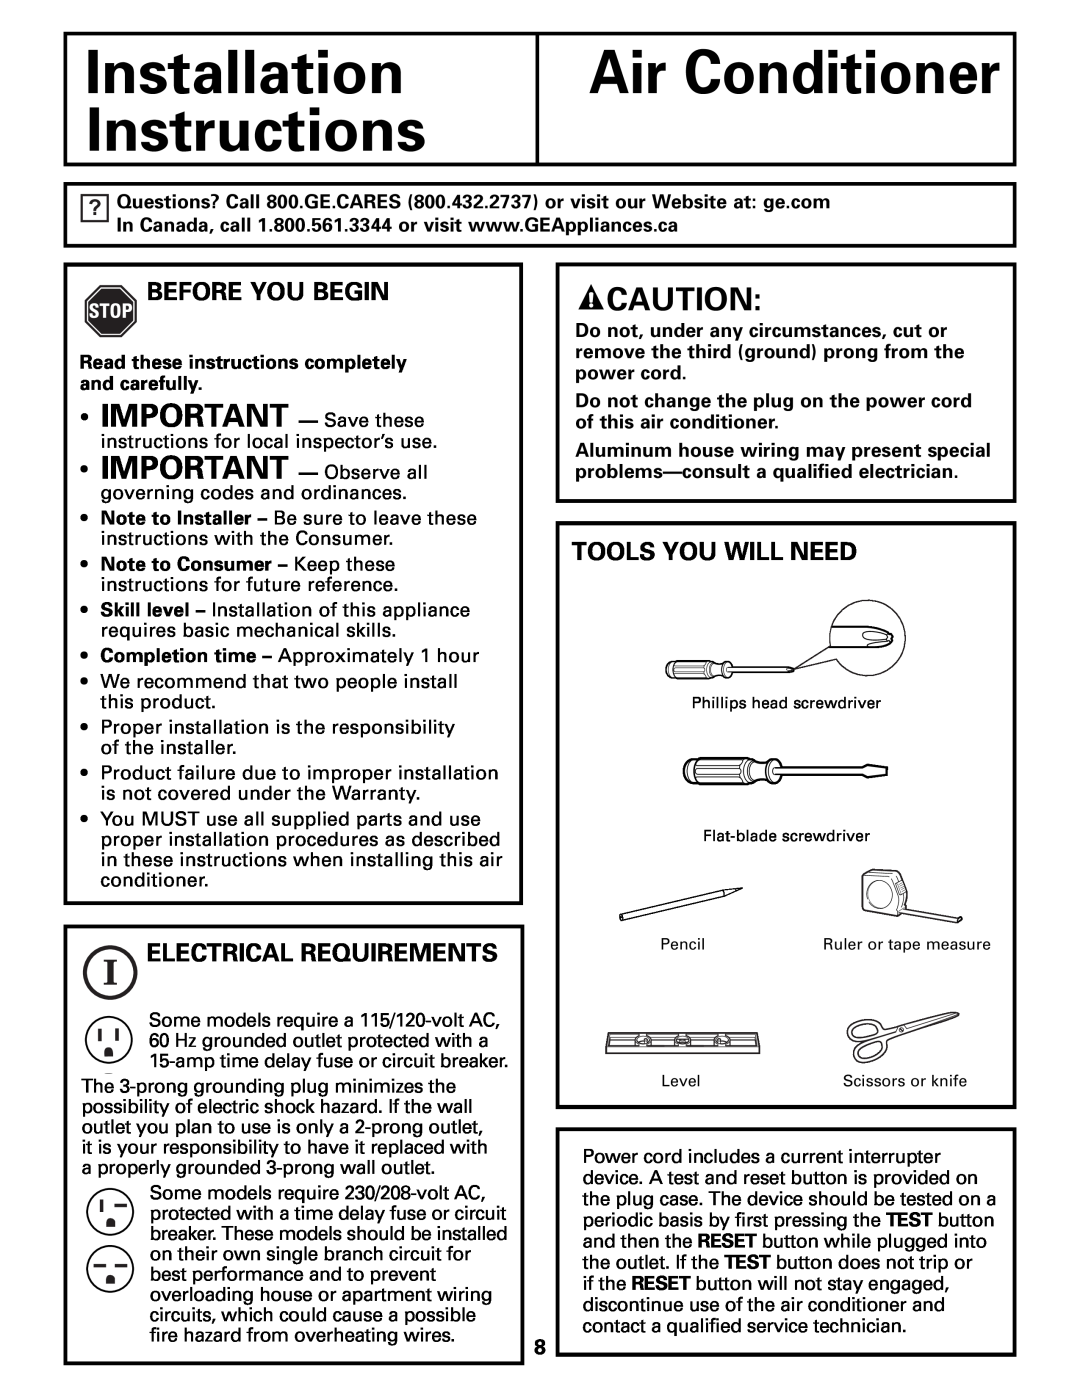 GE AEQ05 Installation Instructions, Air Conditioner, IMPORTANT - Save these, Before You Begin, Electrical Requirements 